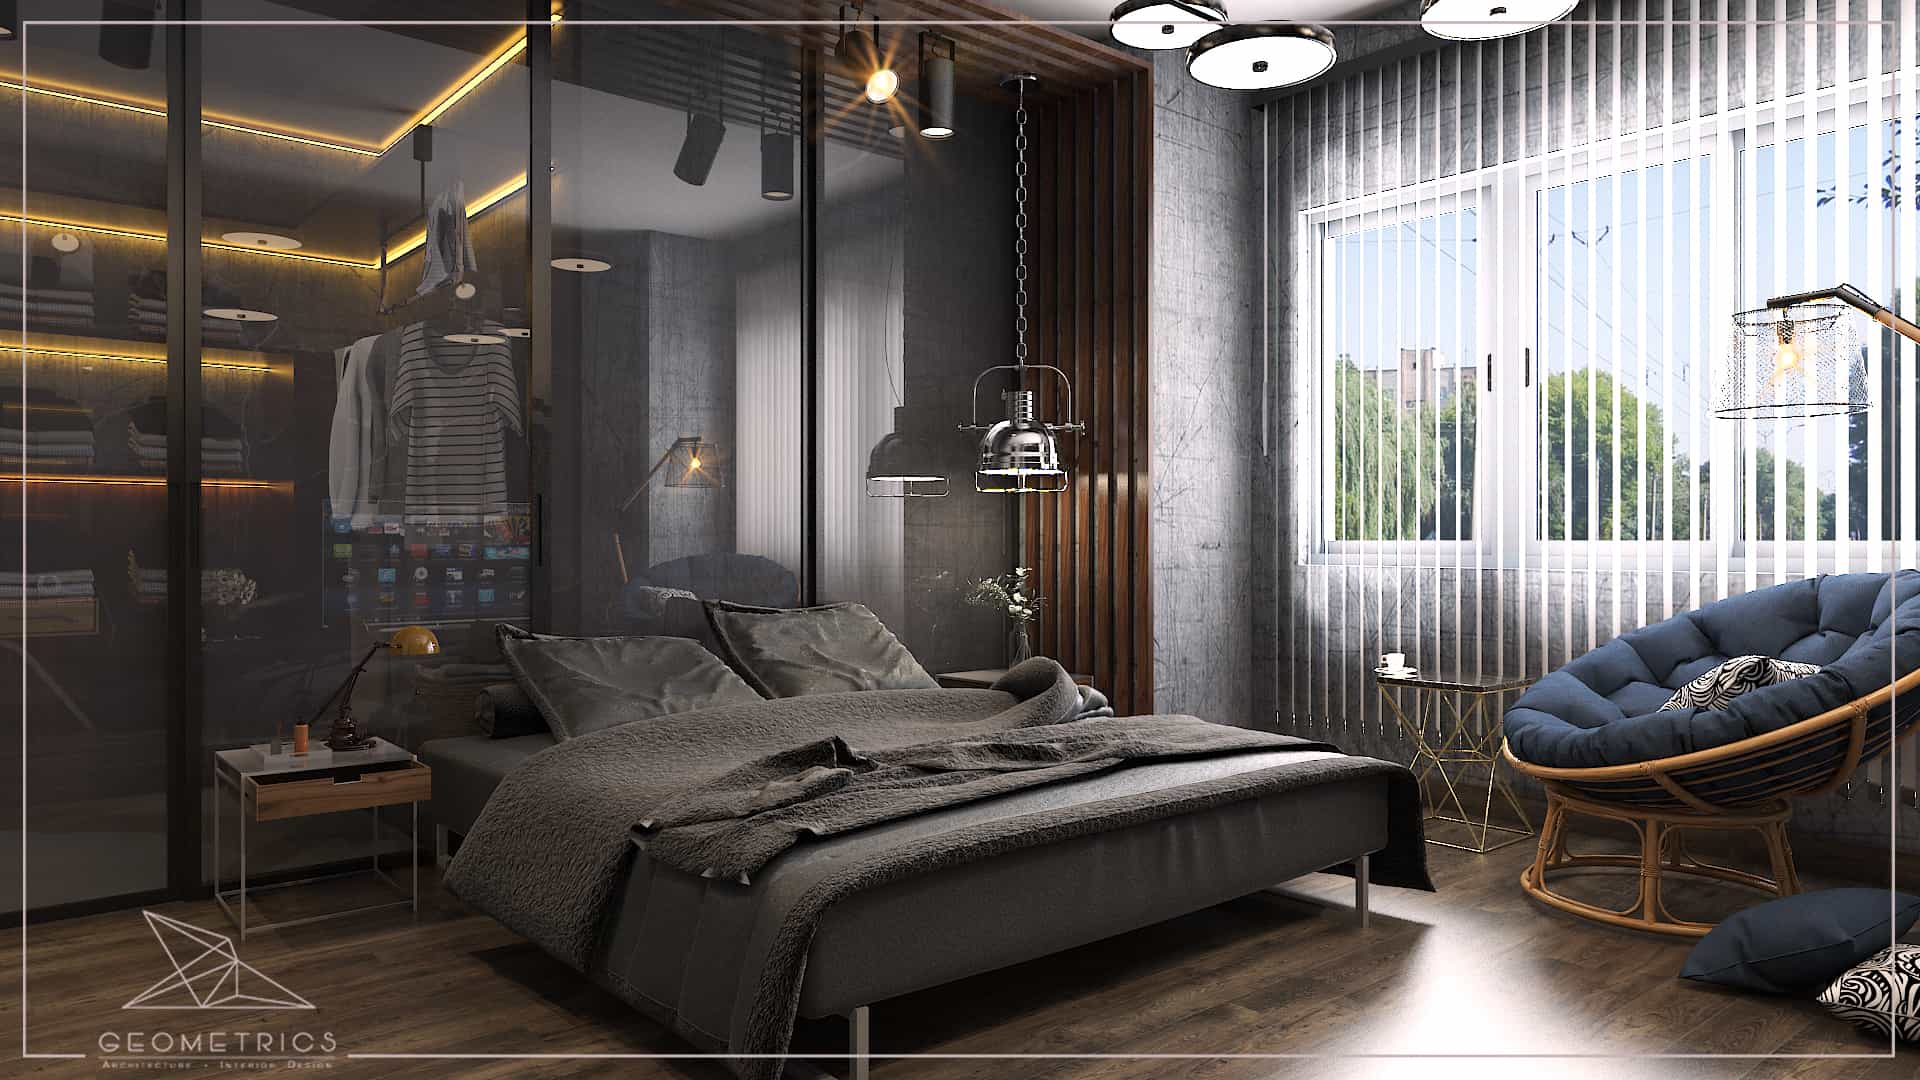 Cool Industrial Interior Design Bedroom For Small Room